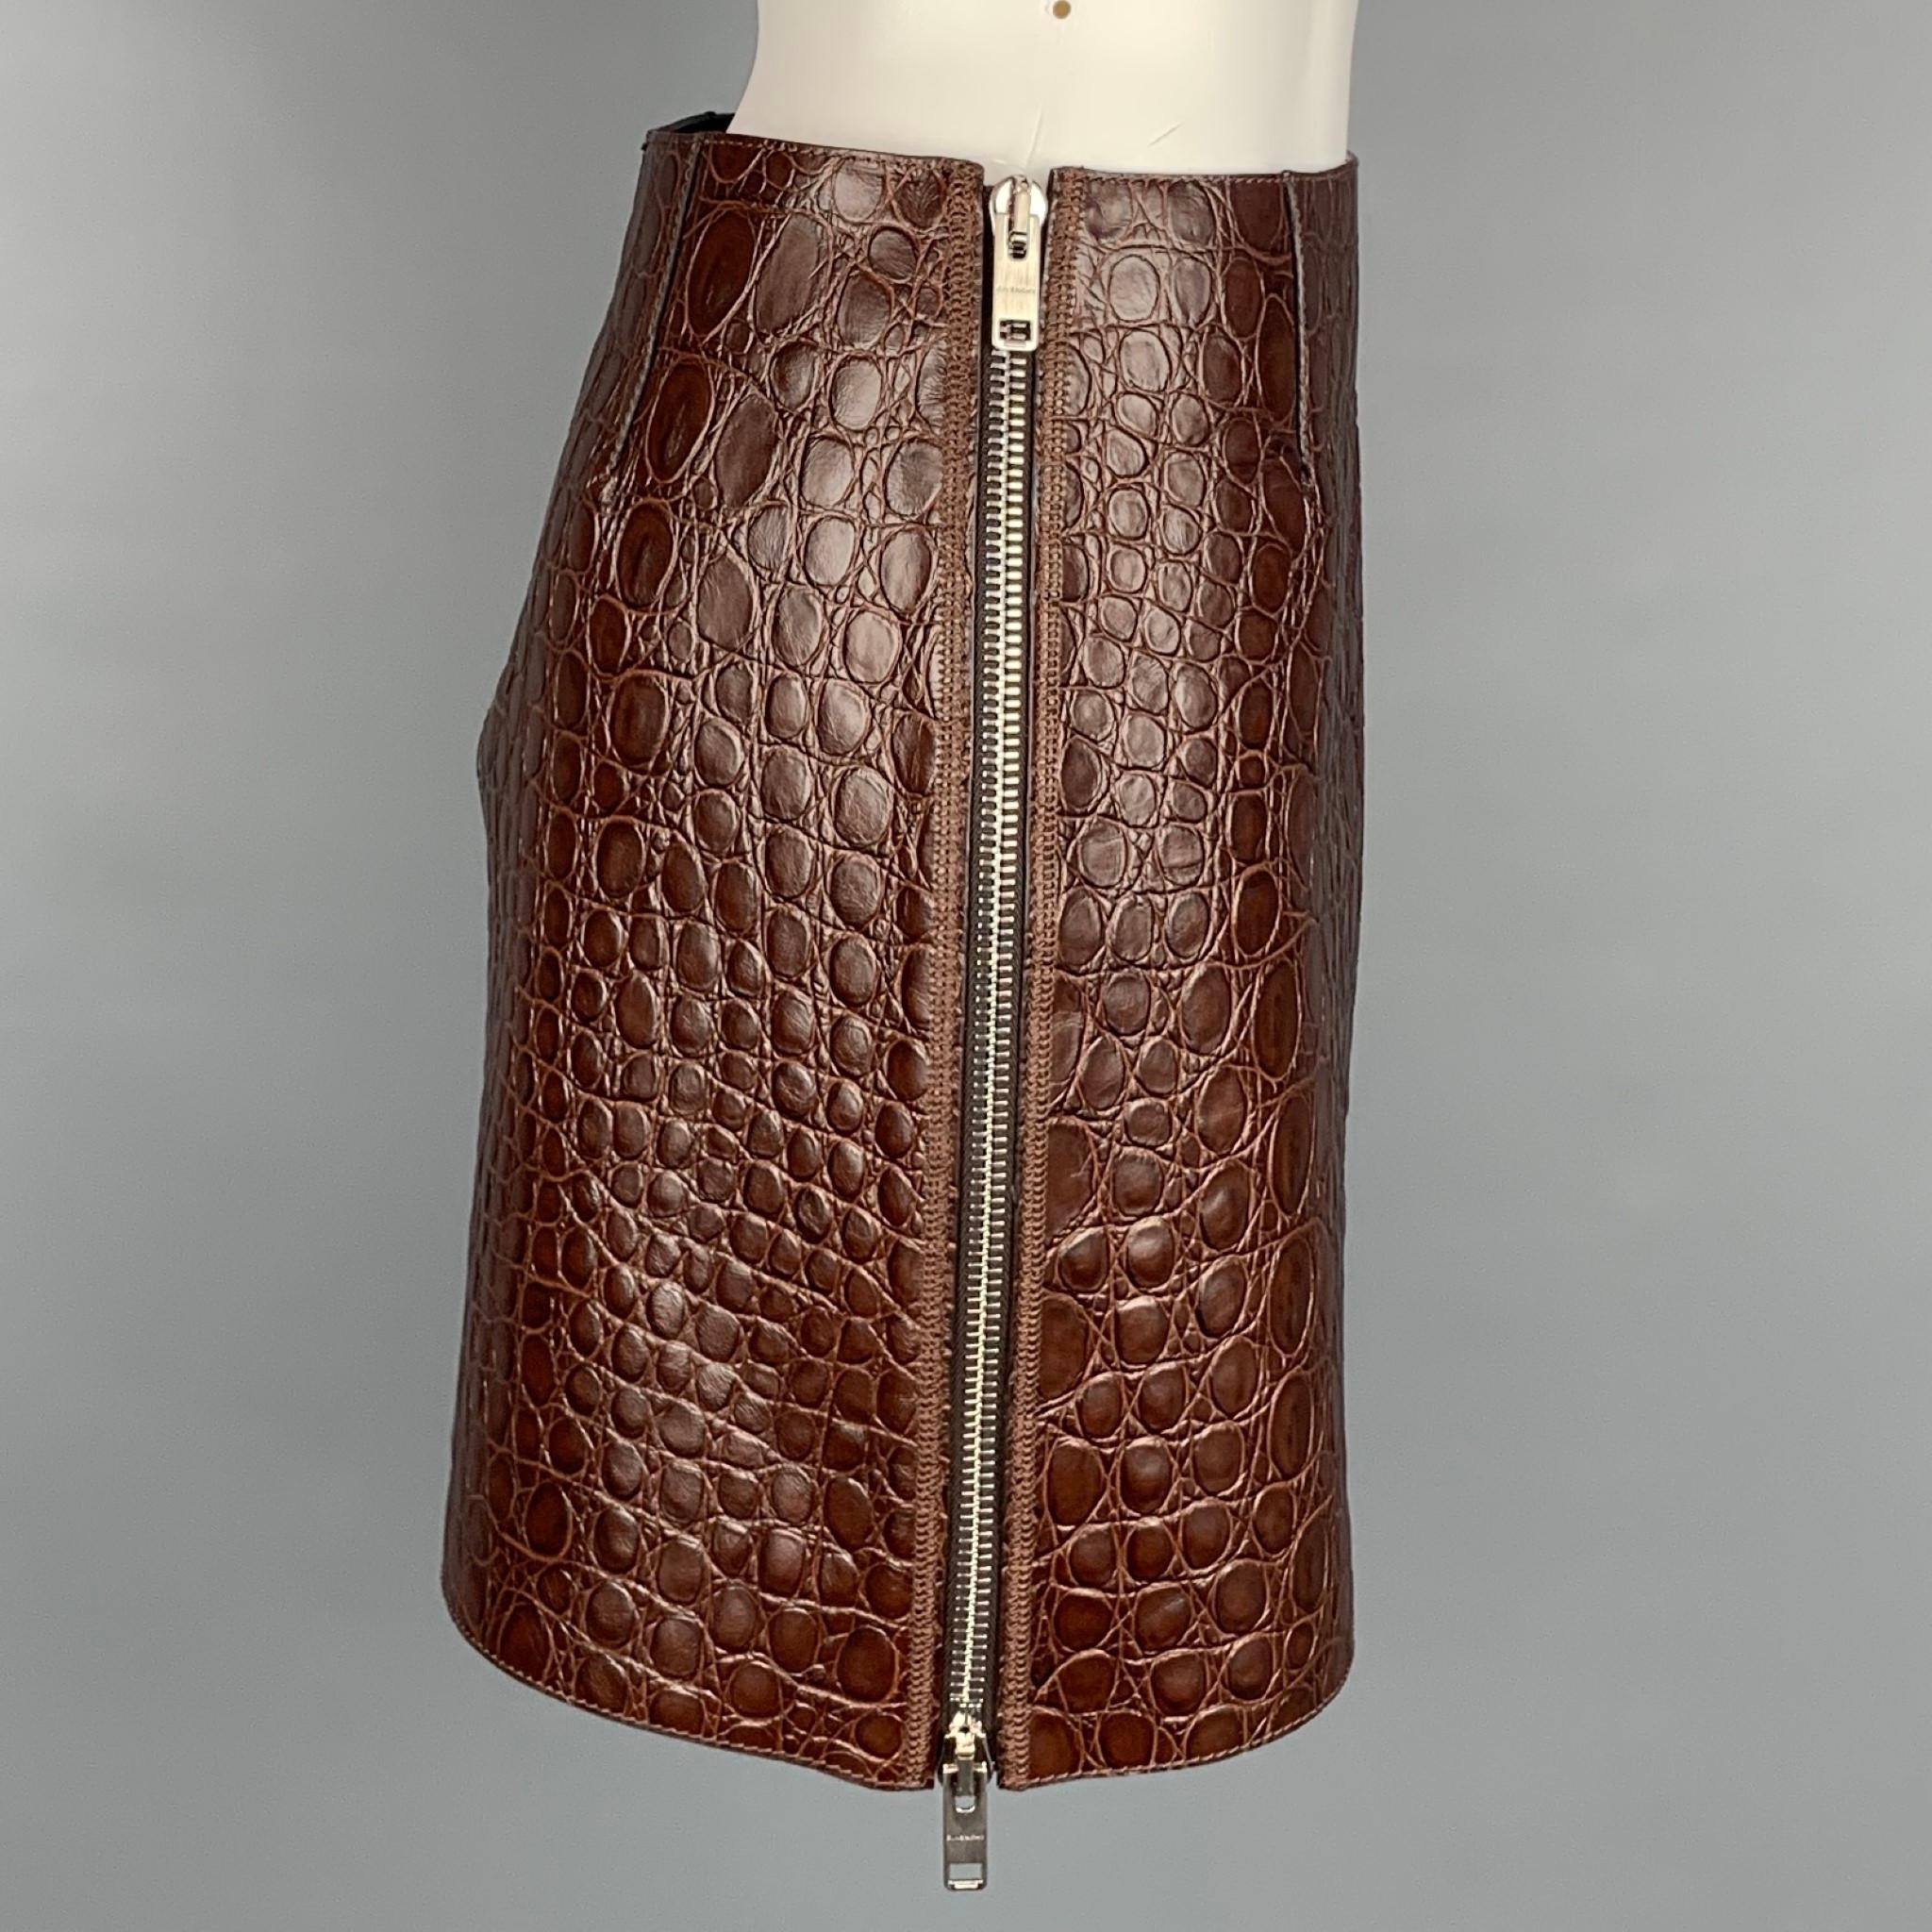 GIVENCHY Spring Summer 2021 mini skirt comes in a brown crocodile effect vintage leather featuring double side zipper closures. Made in Italy. 

Excellent Pre-Owned Condition.
Marked:  36
Original Retail Price: $2,230.00

Measurements:

Waist: 28